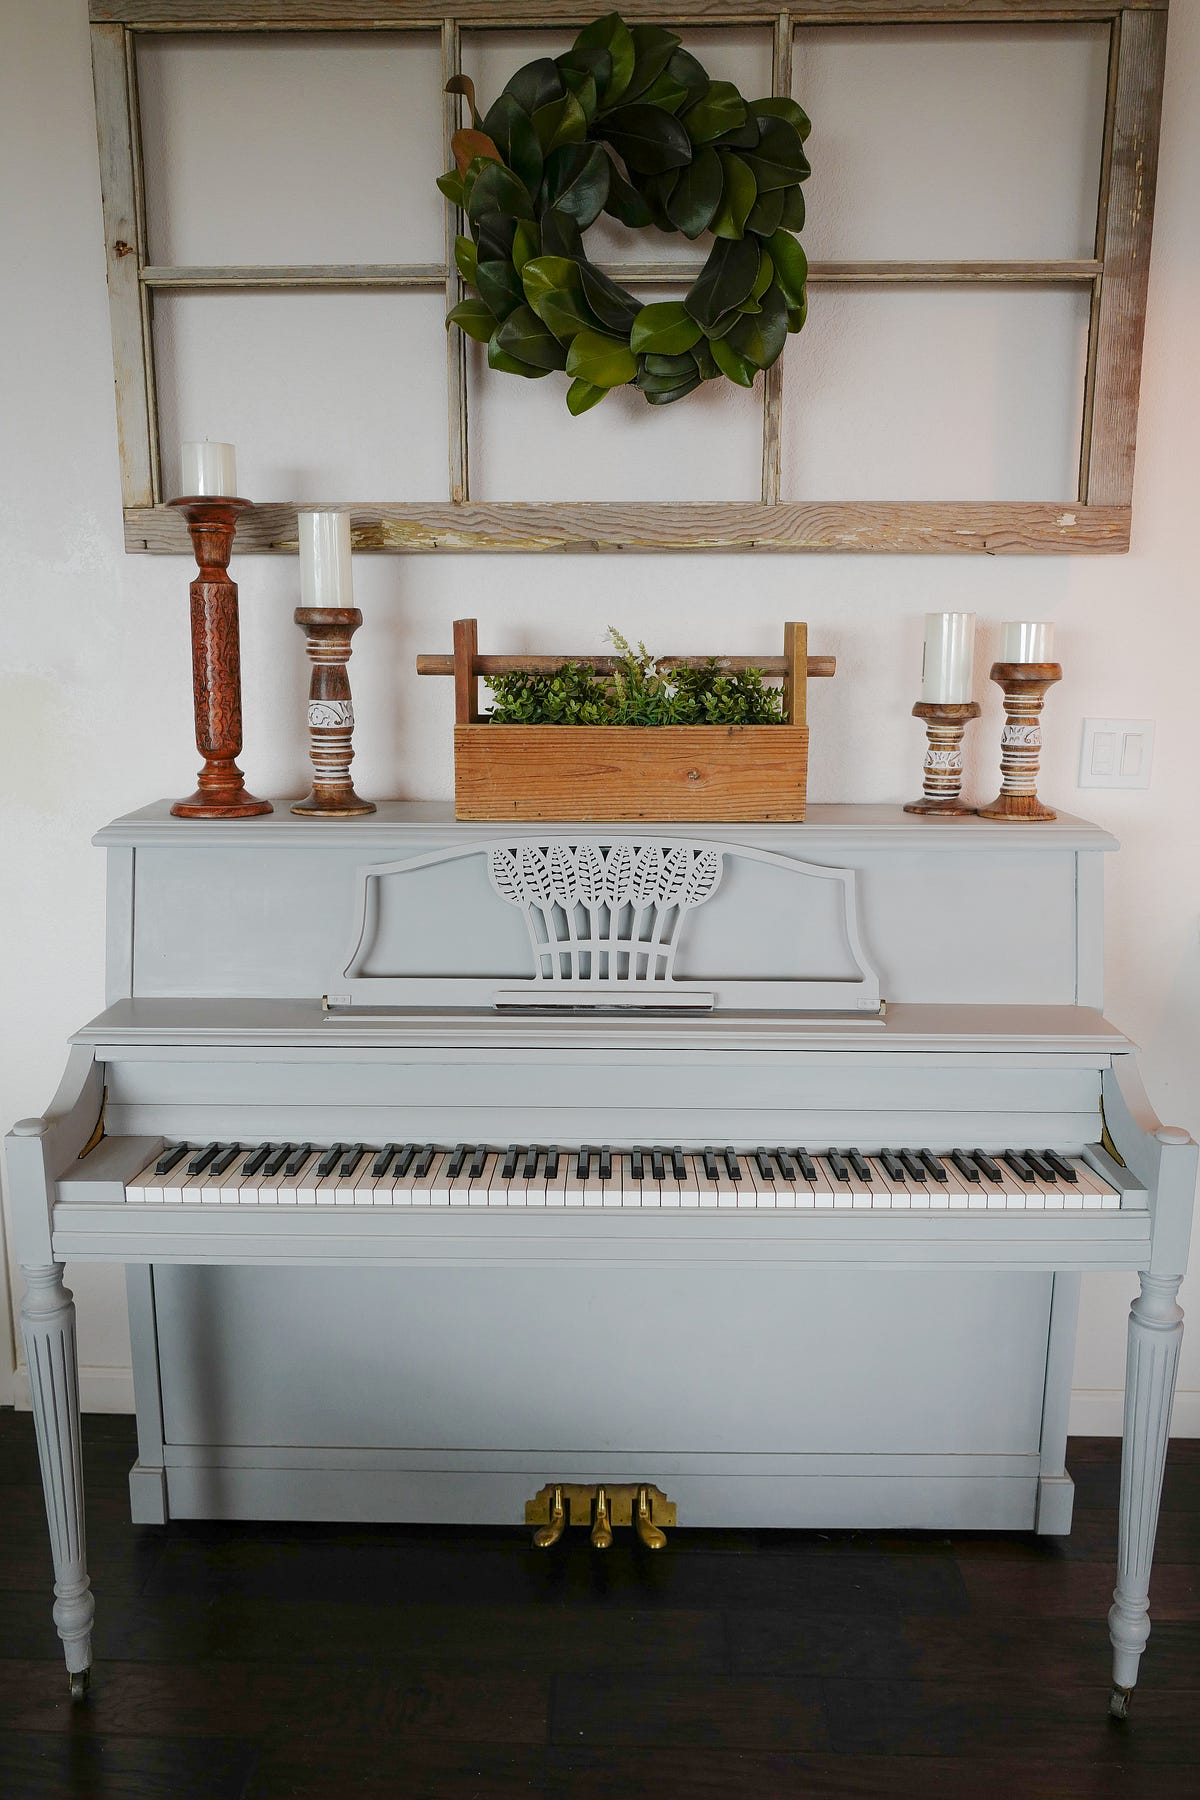 Decorating Your Piano the Joanna Gaines Way - Selah Living